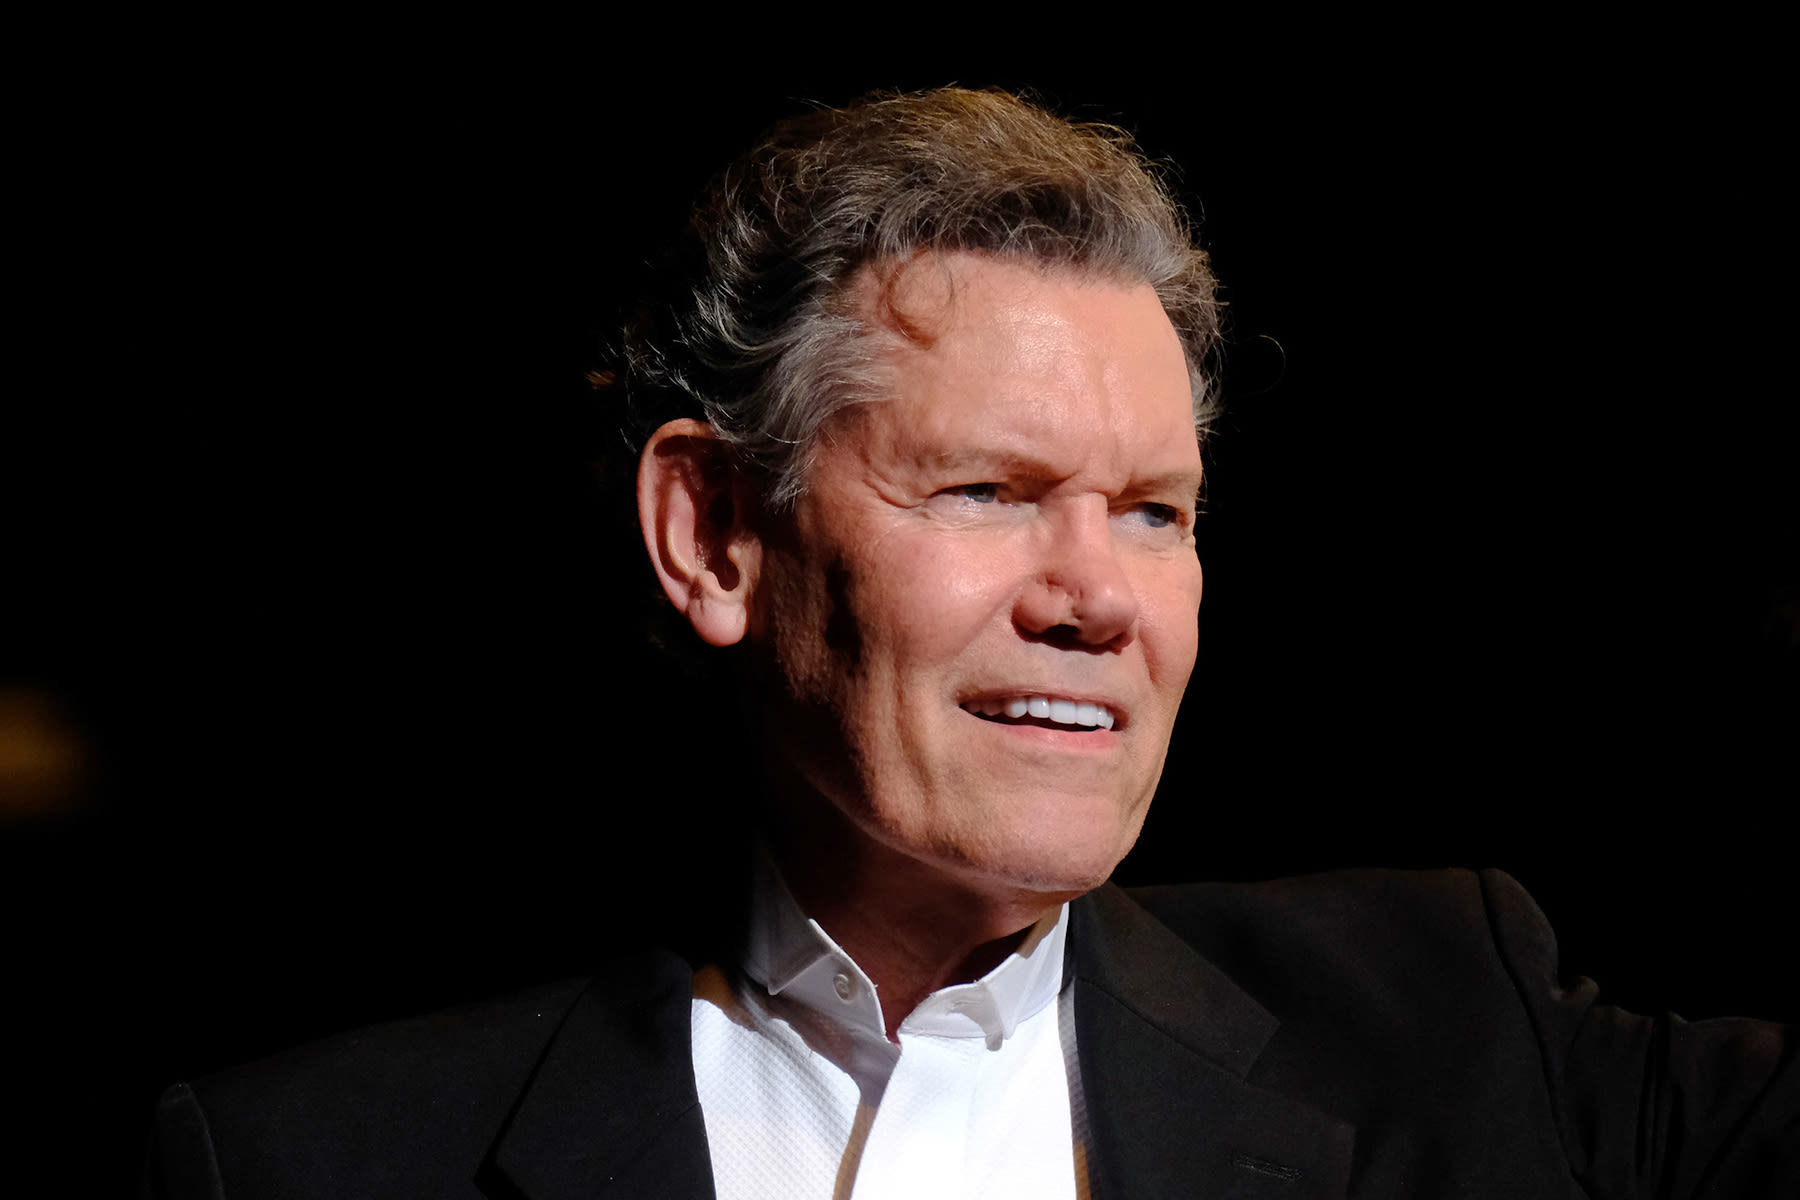 Randy Travis Lost Most of His Speech in 2013. How Is He Releasing a New Song?